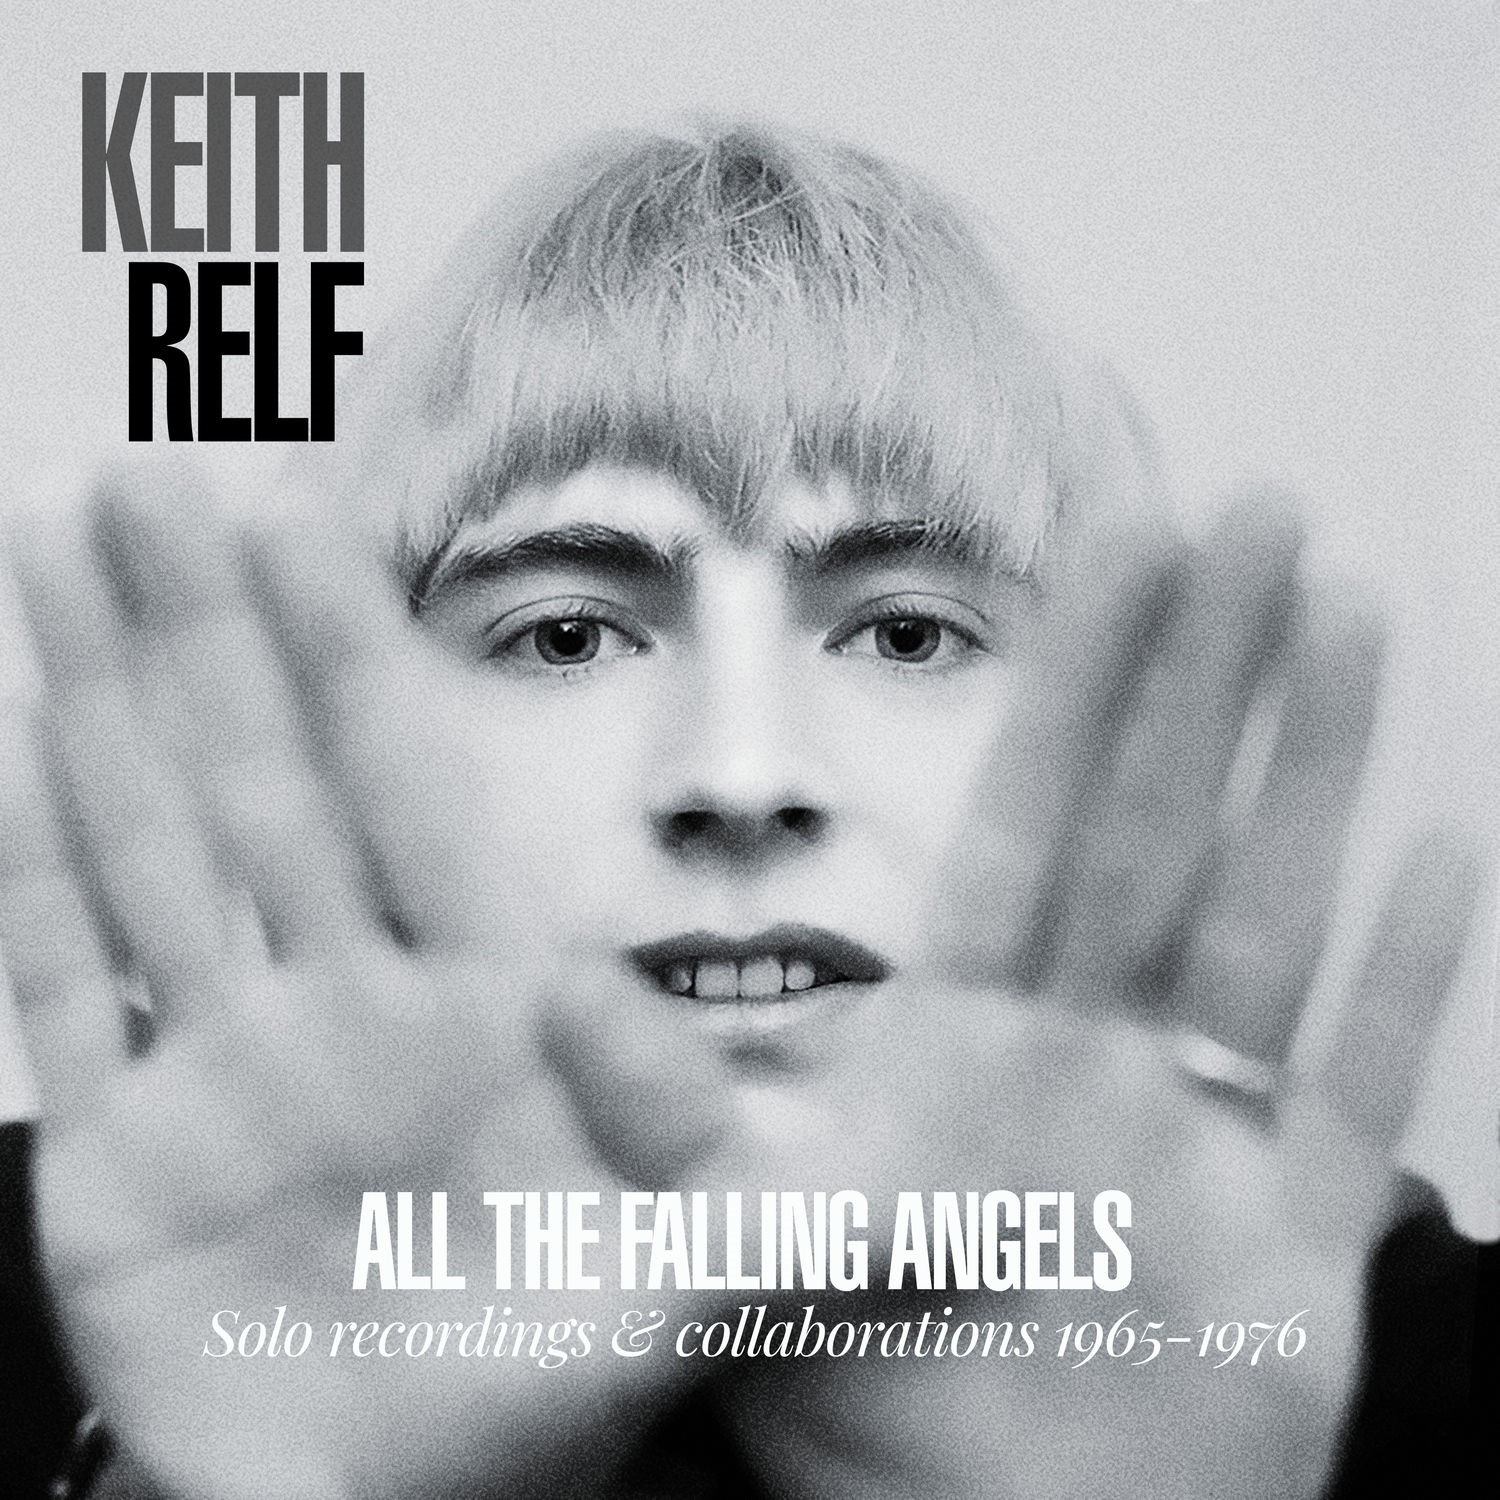 Keith Relf – All The Falling Angels (Solo Recordings & Collaboration 1965-1976) (2020) [FLAC 24bit/44,1kHz]